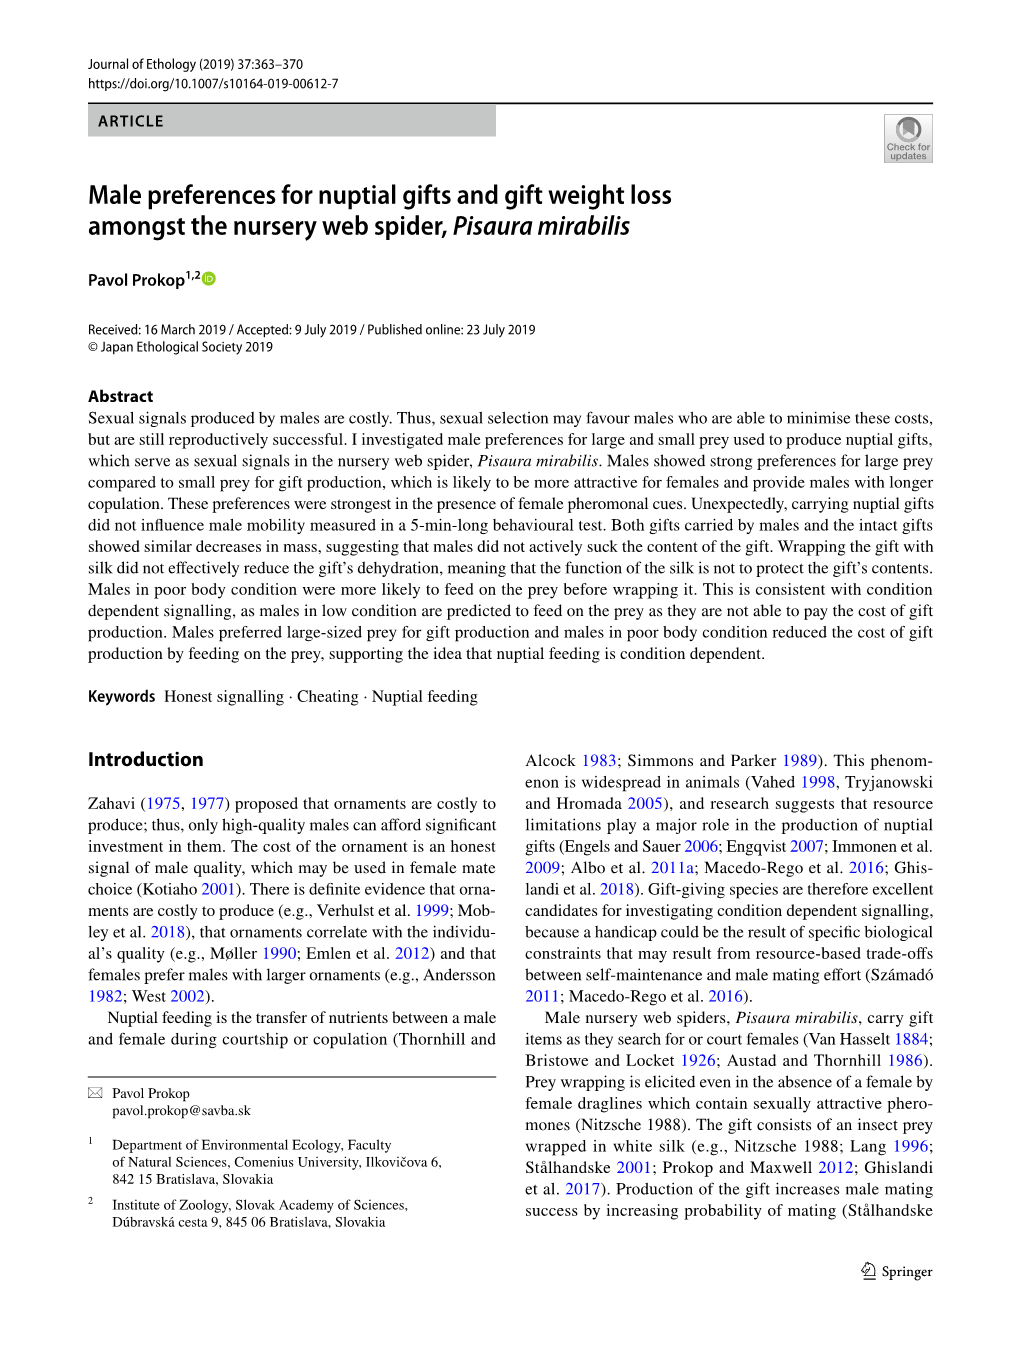 Male Preferences for Nuptial Gifts and Gift Weight Loss Amongst the Nursery Web Spider, Pisaura Mirabilis